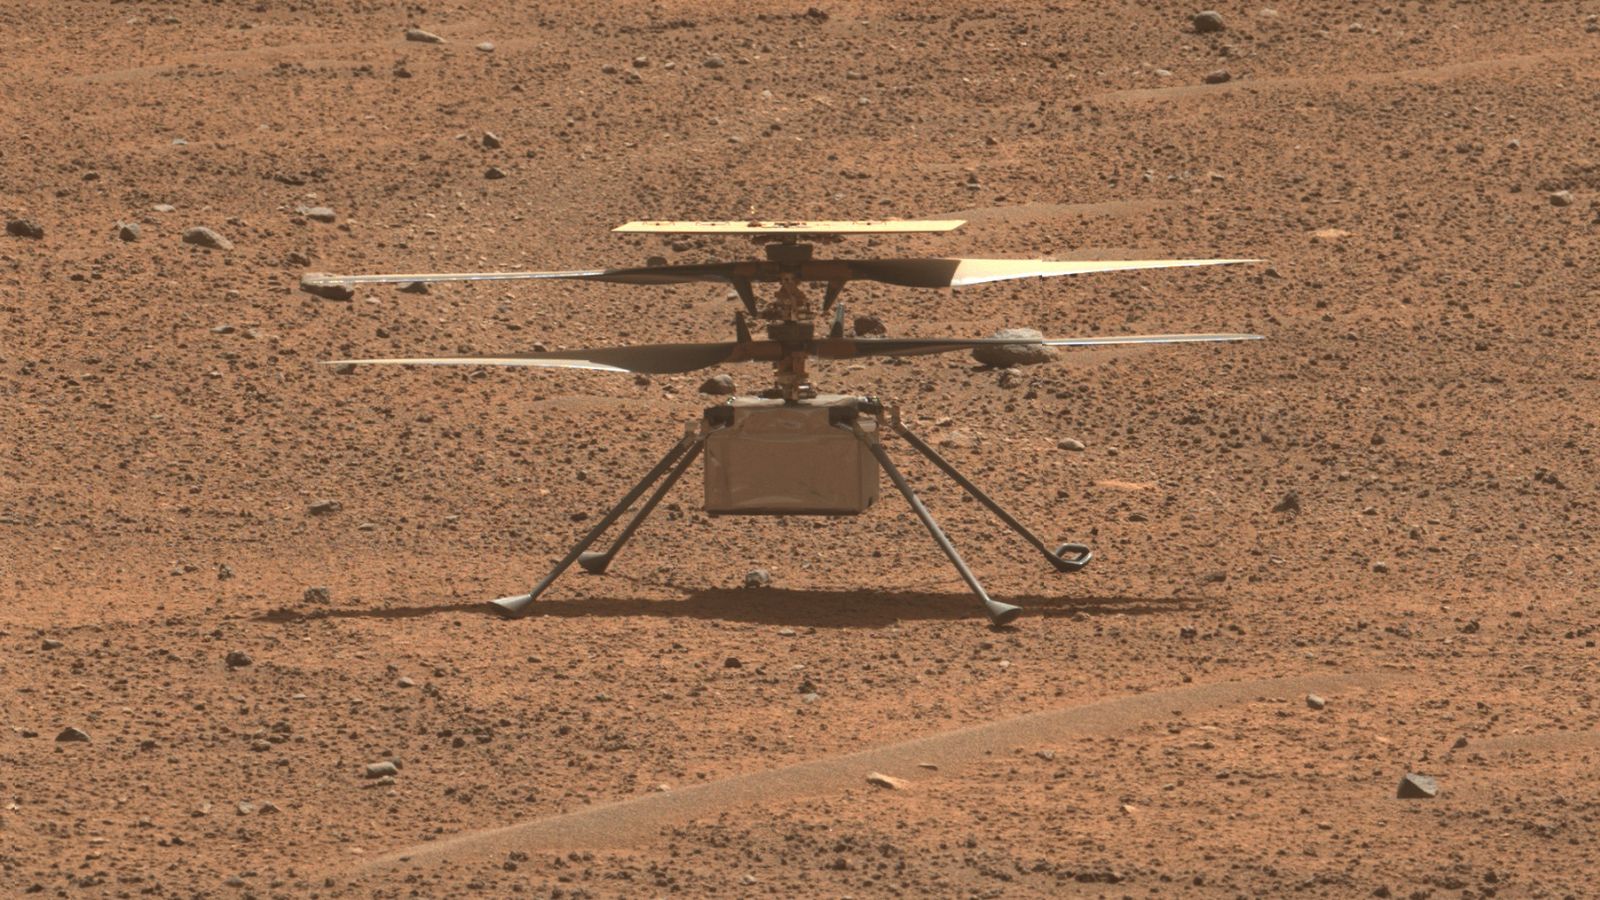 android, road ends for nasa’s ingenuity mars helicopter due to rotor damage